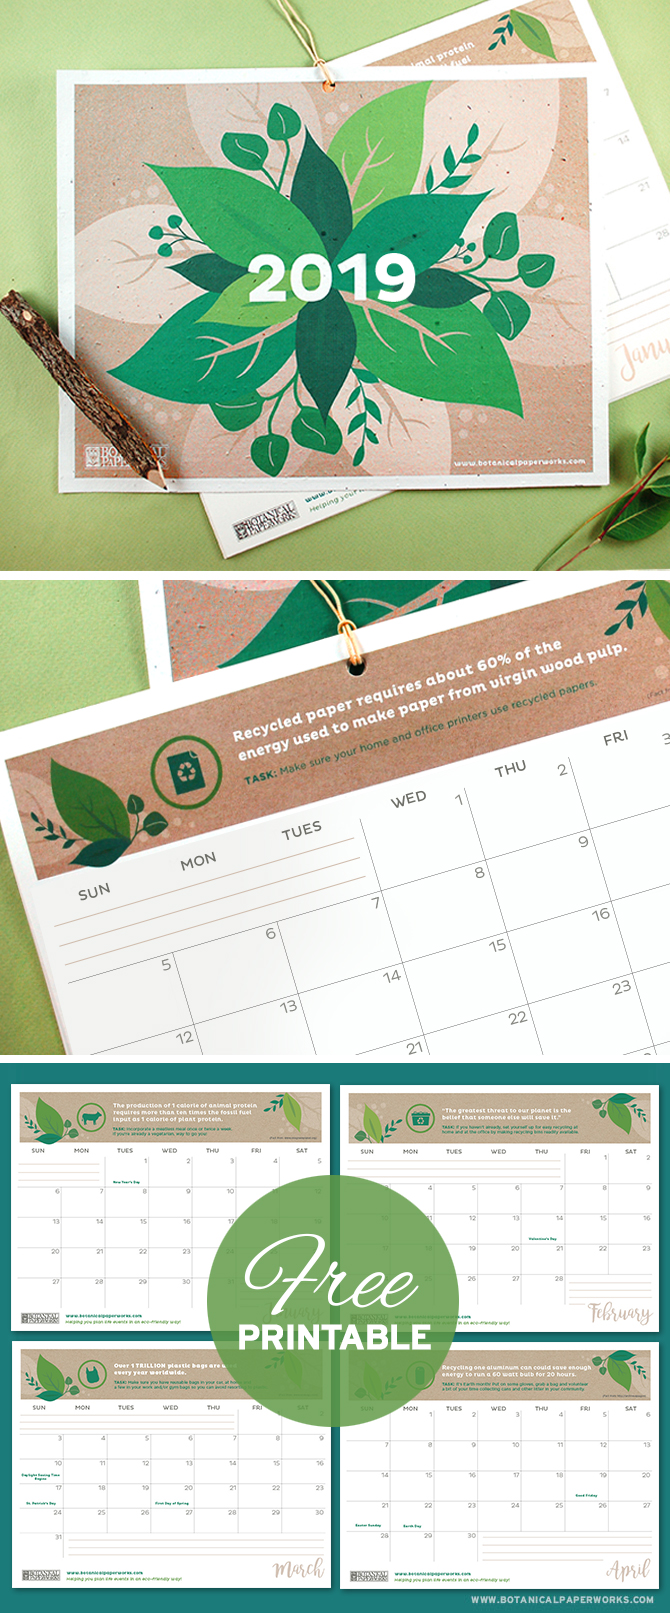 With facts, quotes and tips to help you live a more eco-friendly life, this vibrant Free Printable 2019 Eco Tips Calendar is perfect for those who want to plan a greener future. Simply download and print the PDF at home!